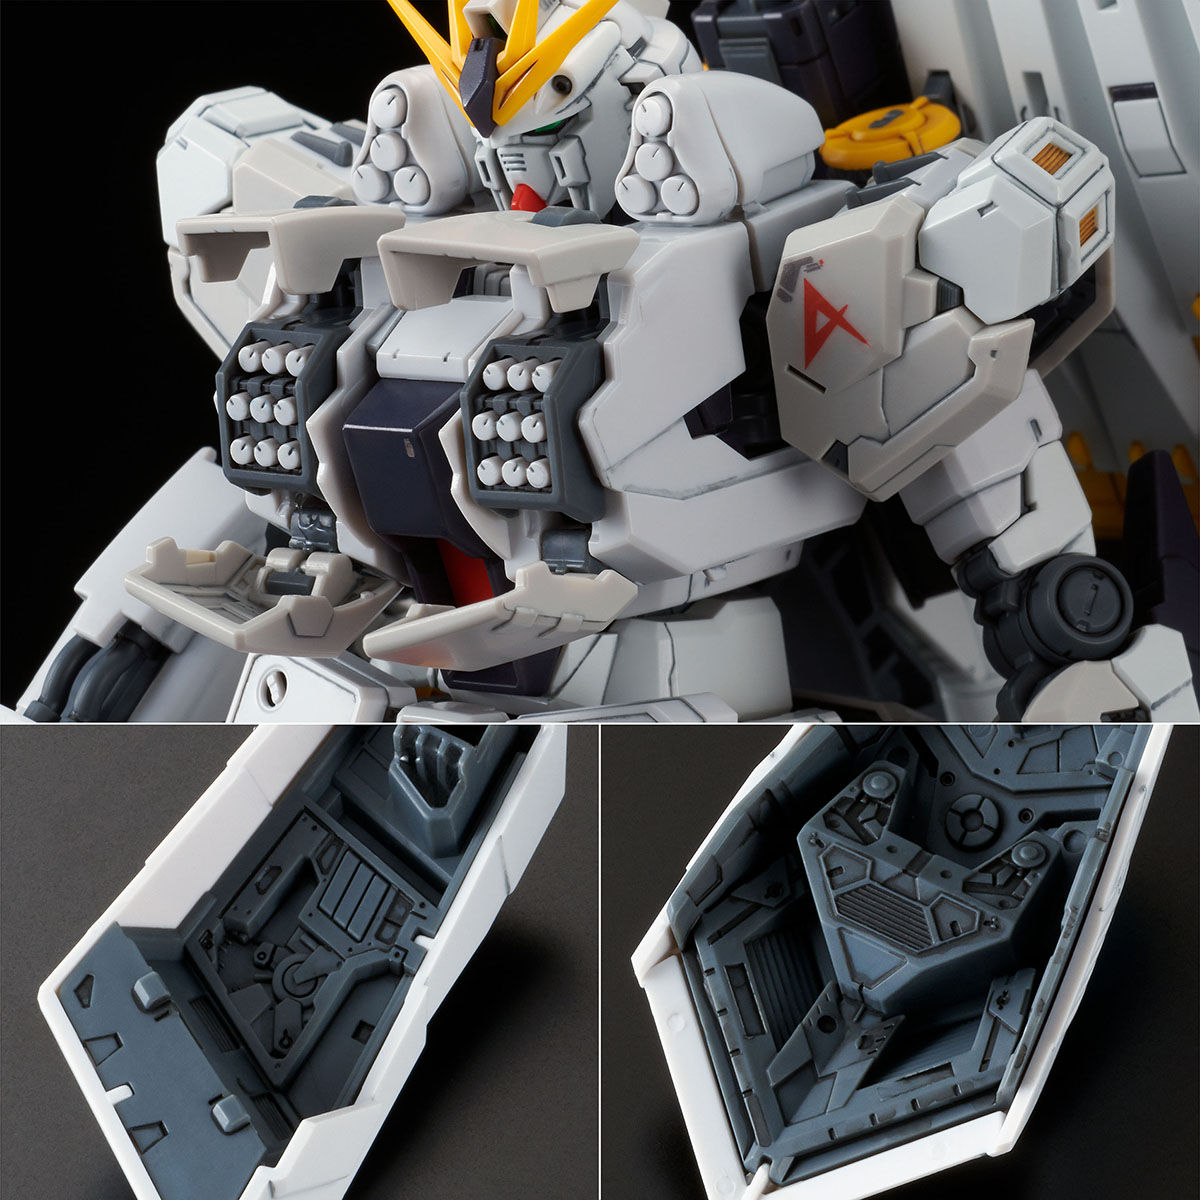 Rg 1 144 N Gundam Hws Oct 2020 Delivery Gundam Premium Bandai Singapore Online Store For Action Figures Model Kits Toys And More